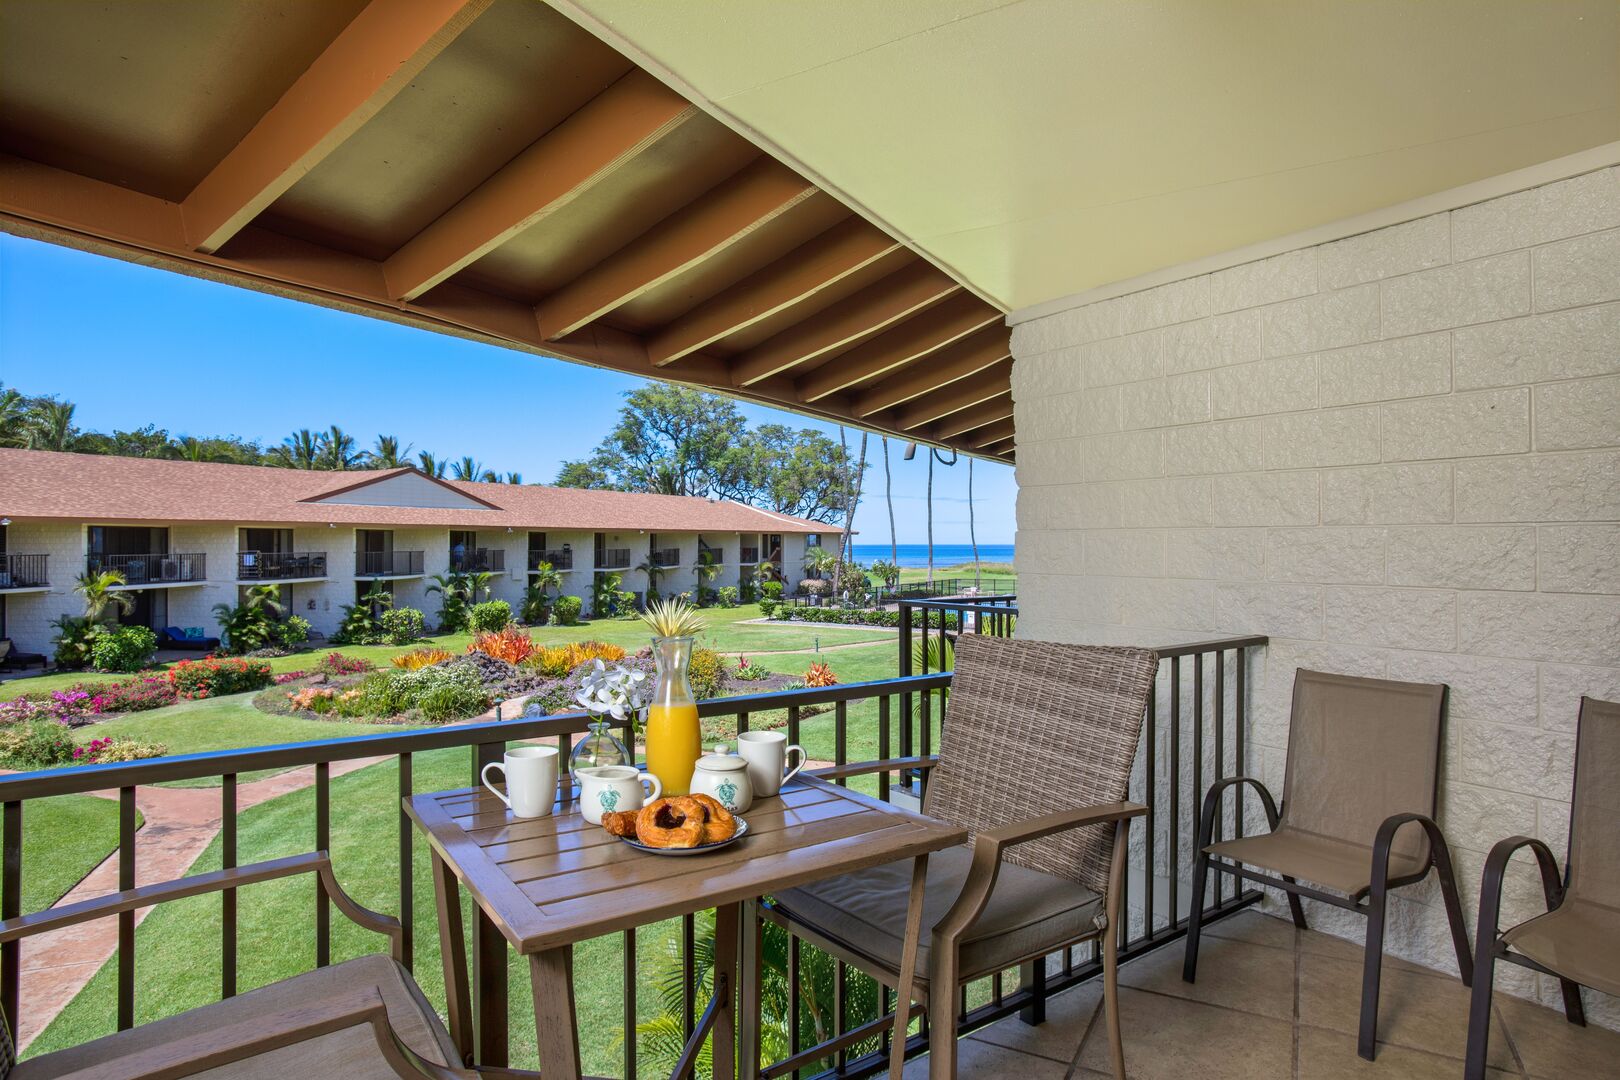 Relax on the private lanai balcony